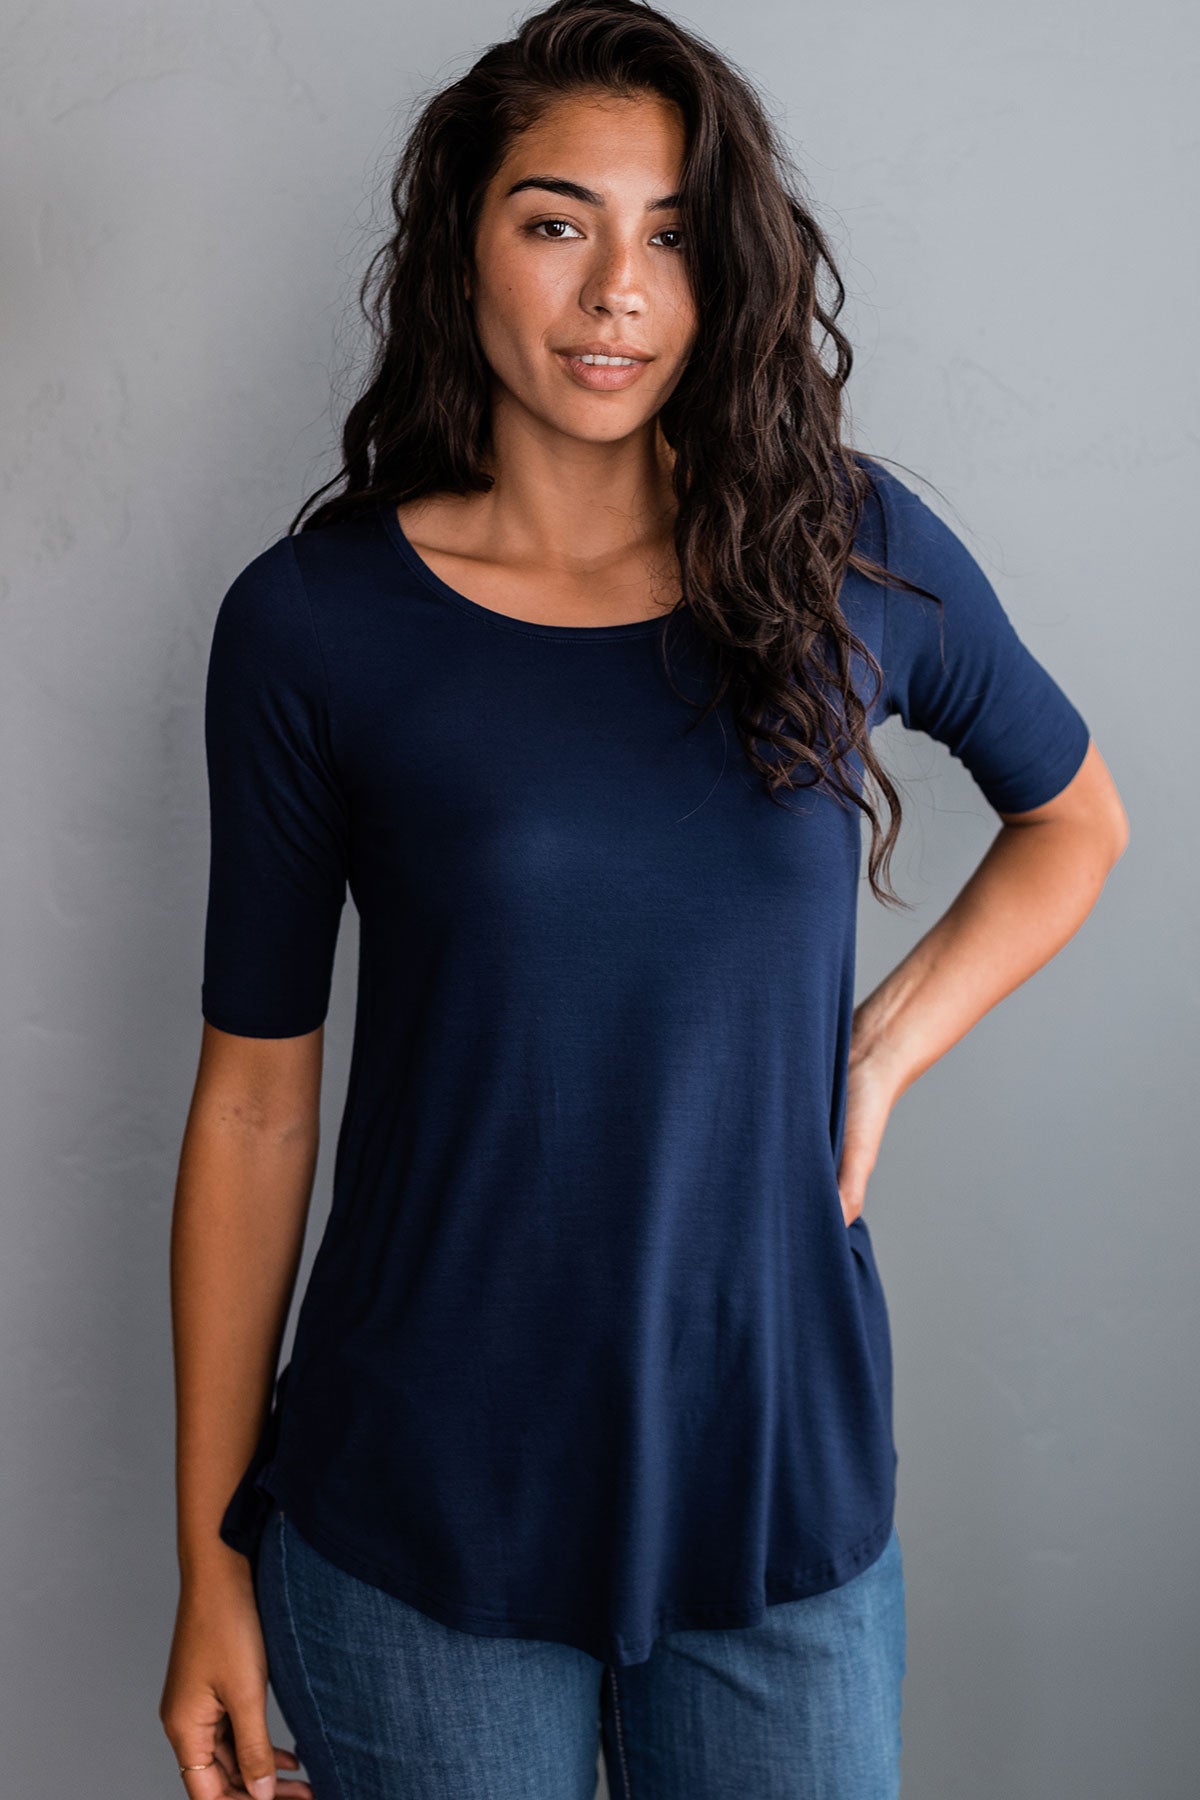 A woman standing with one hand on her hip, wearing Yala Sandy Relaxed Fit Scoop Neck Short Sleeve Bamboo Top in Navy